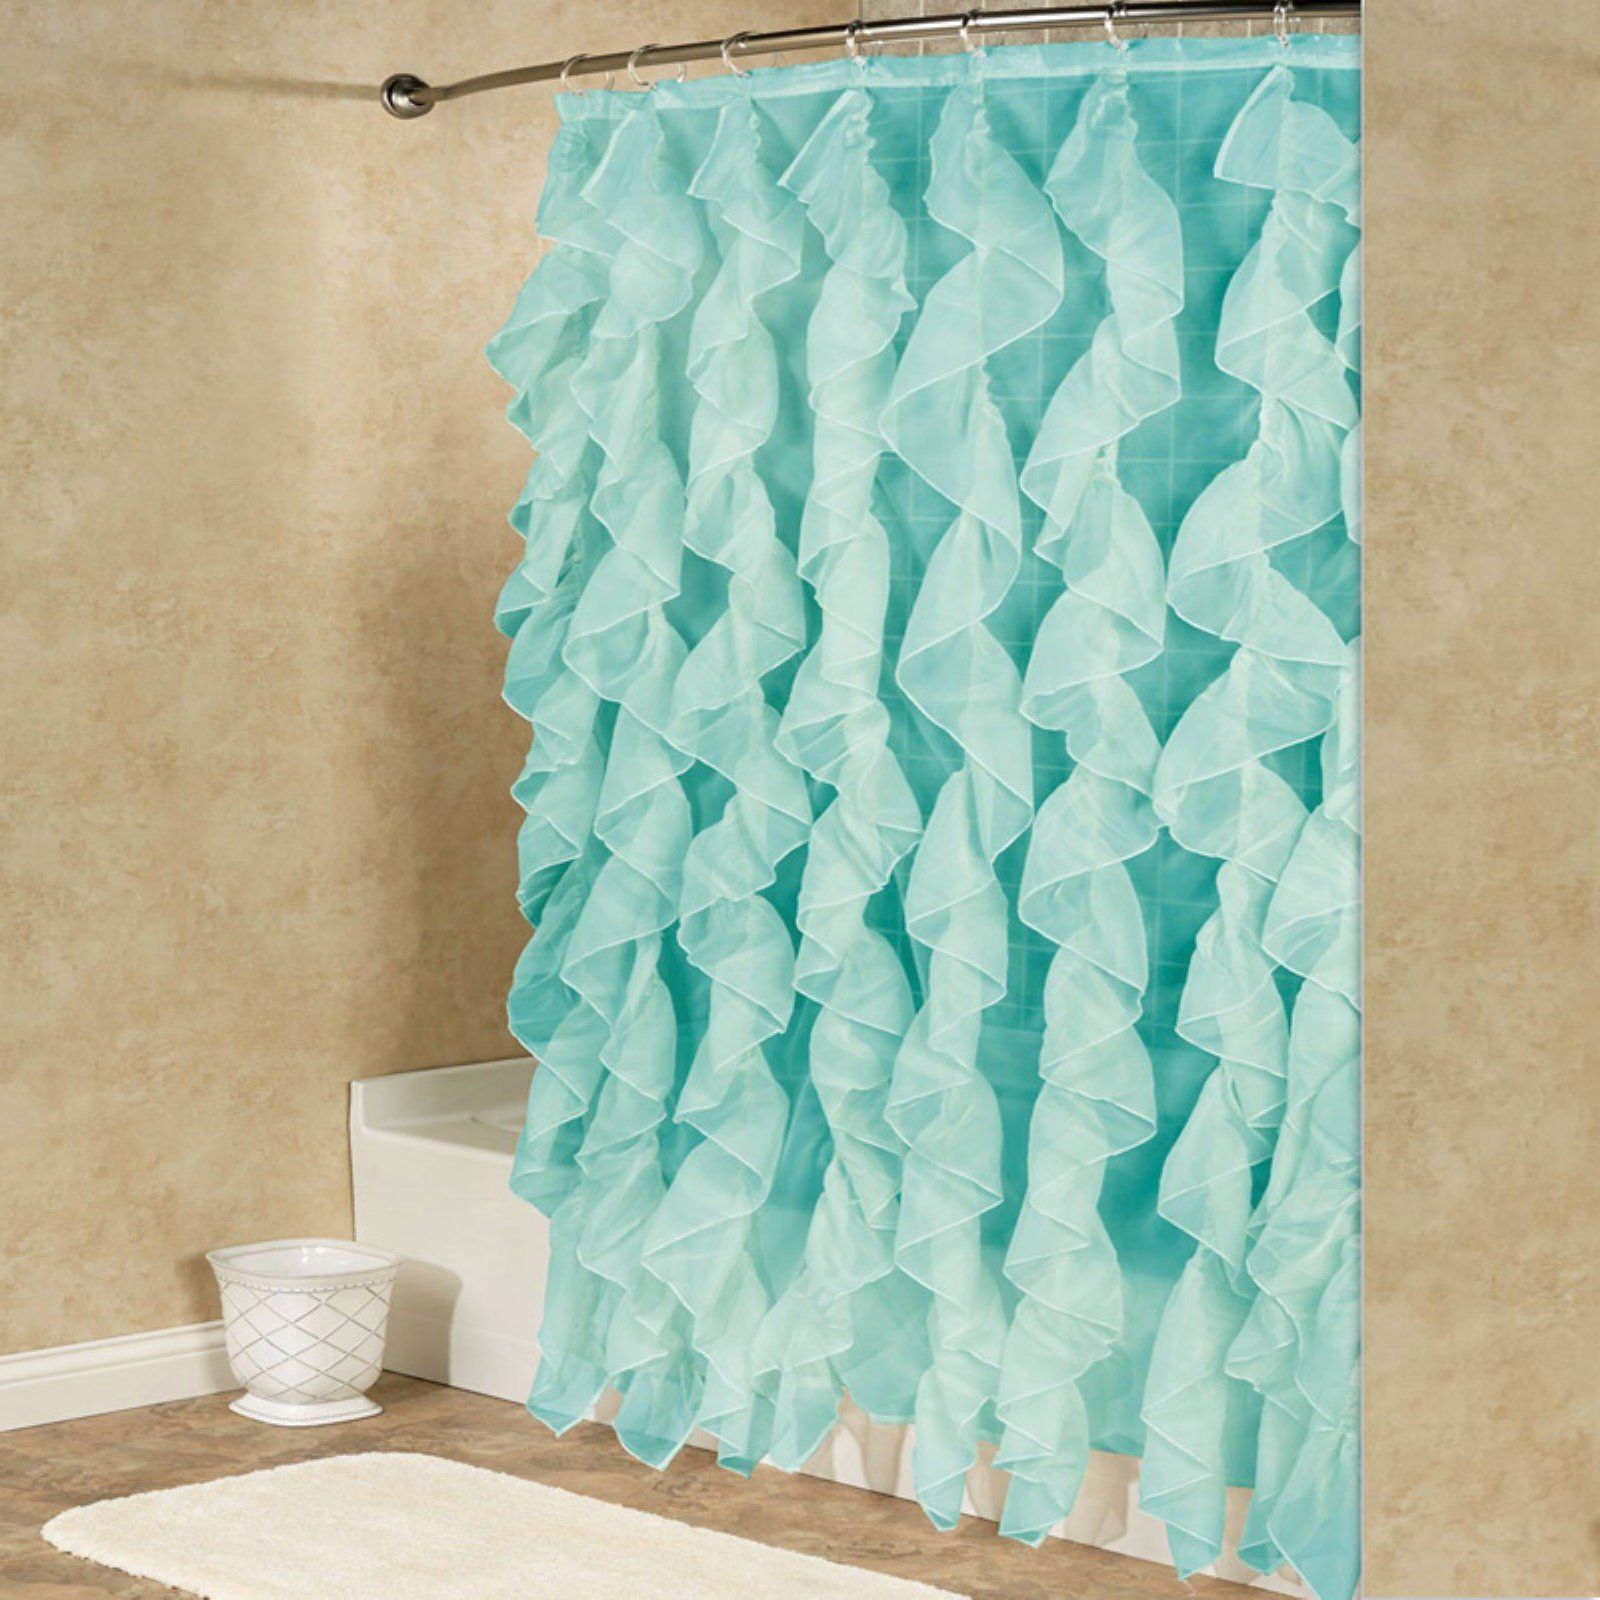 Sheer Voile Waterfall Ruffled Tier Single Curtain Panels Regarding Best And Newest Sweet Home Collection Cascade Chic Sheer Voile Vertical (View 8 of 20)